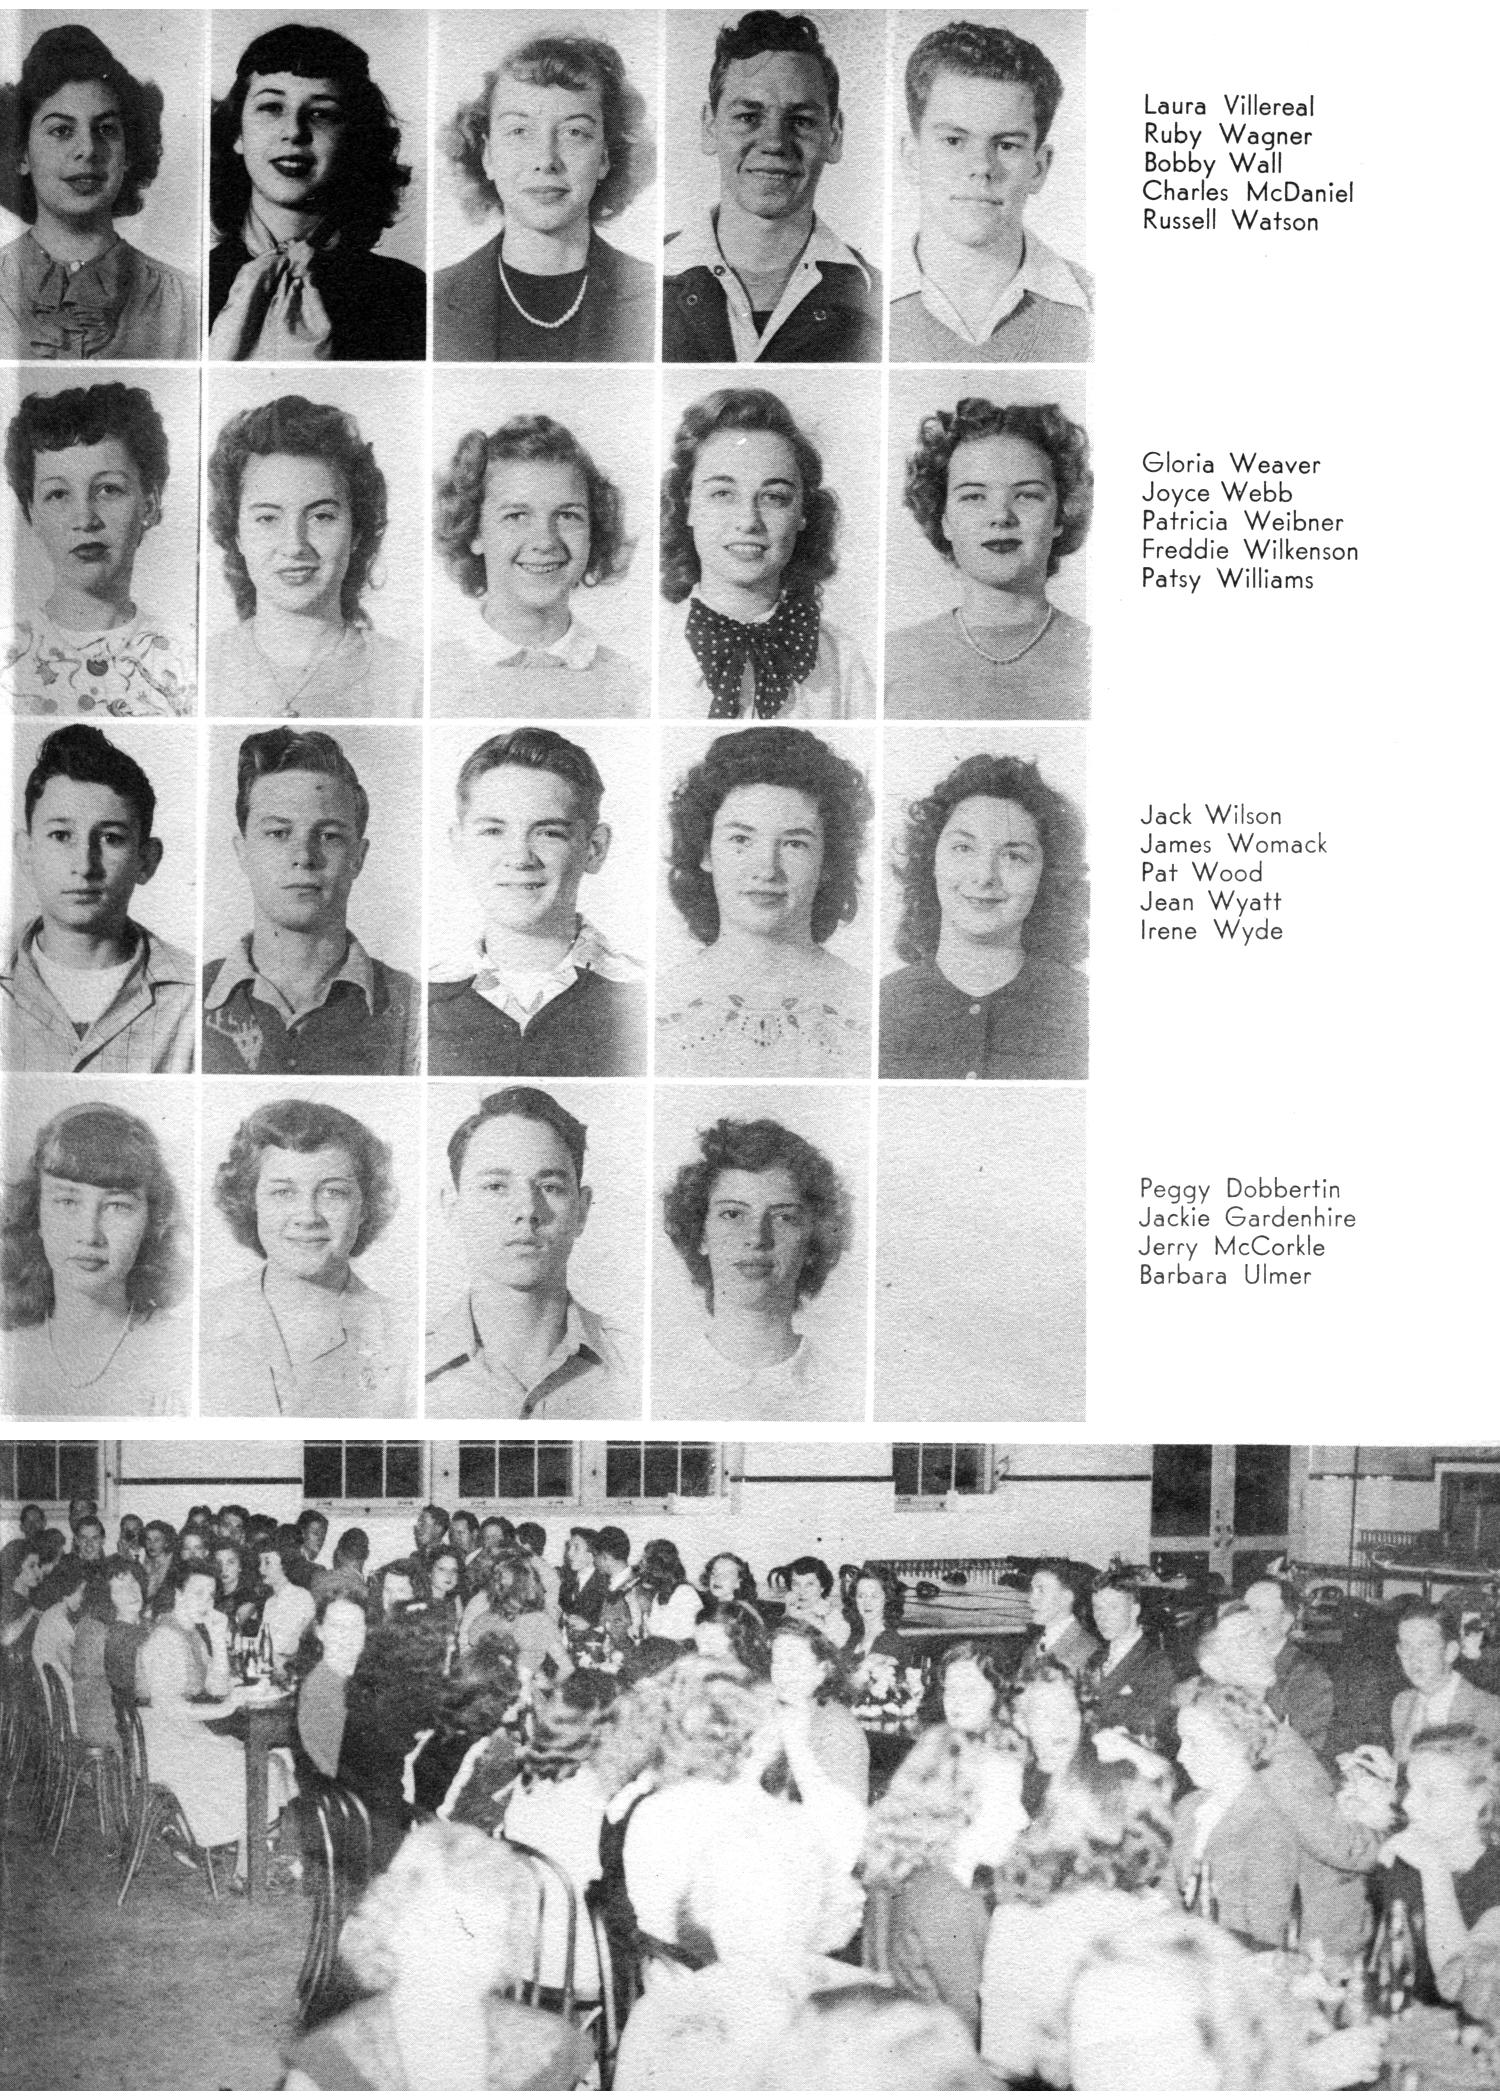 The Yellow Jacket, Yearbook of Thomas Jefferson High School, 1948
                                                
                                                    71
                                                